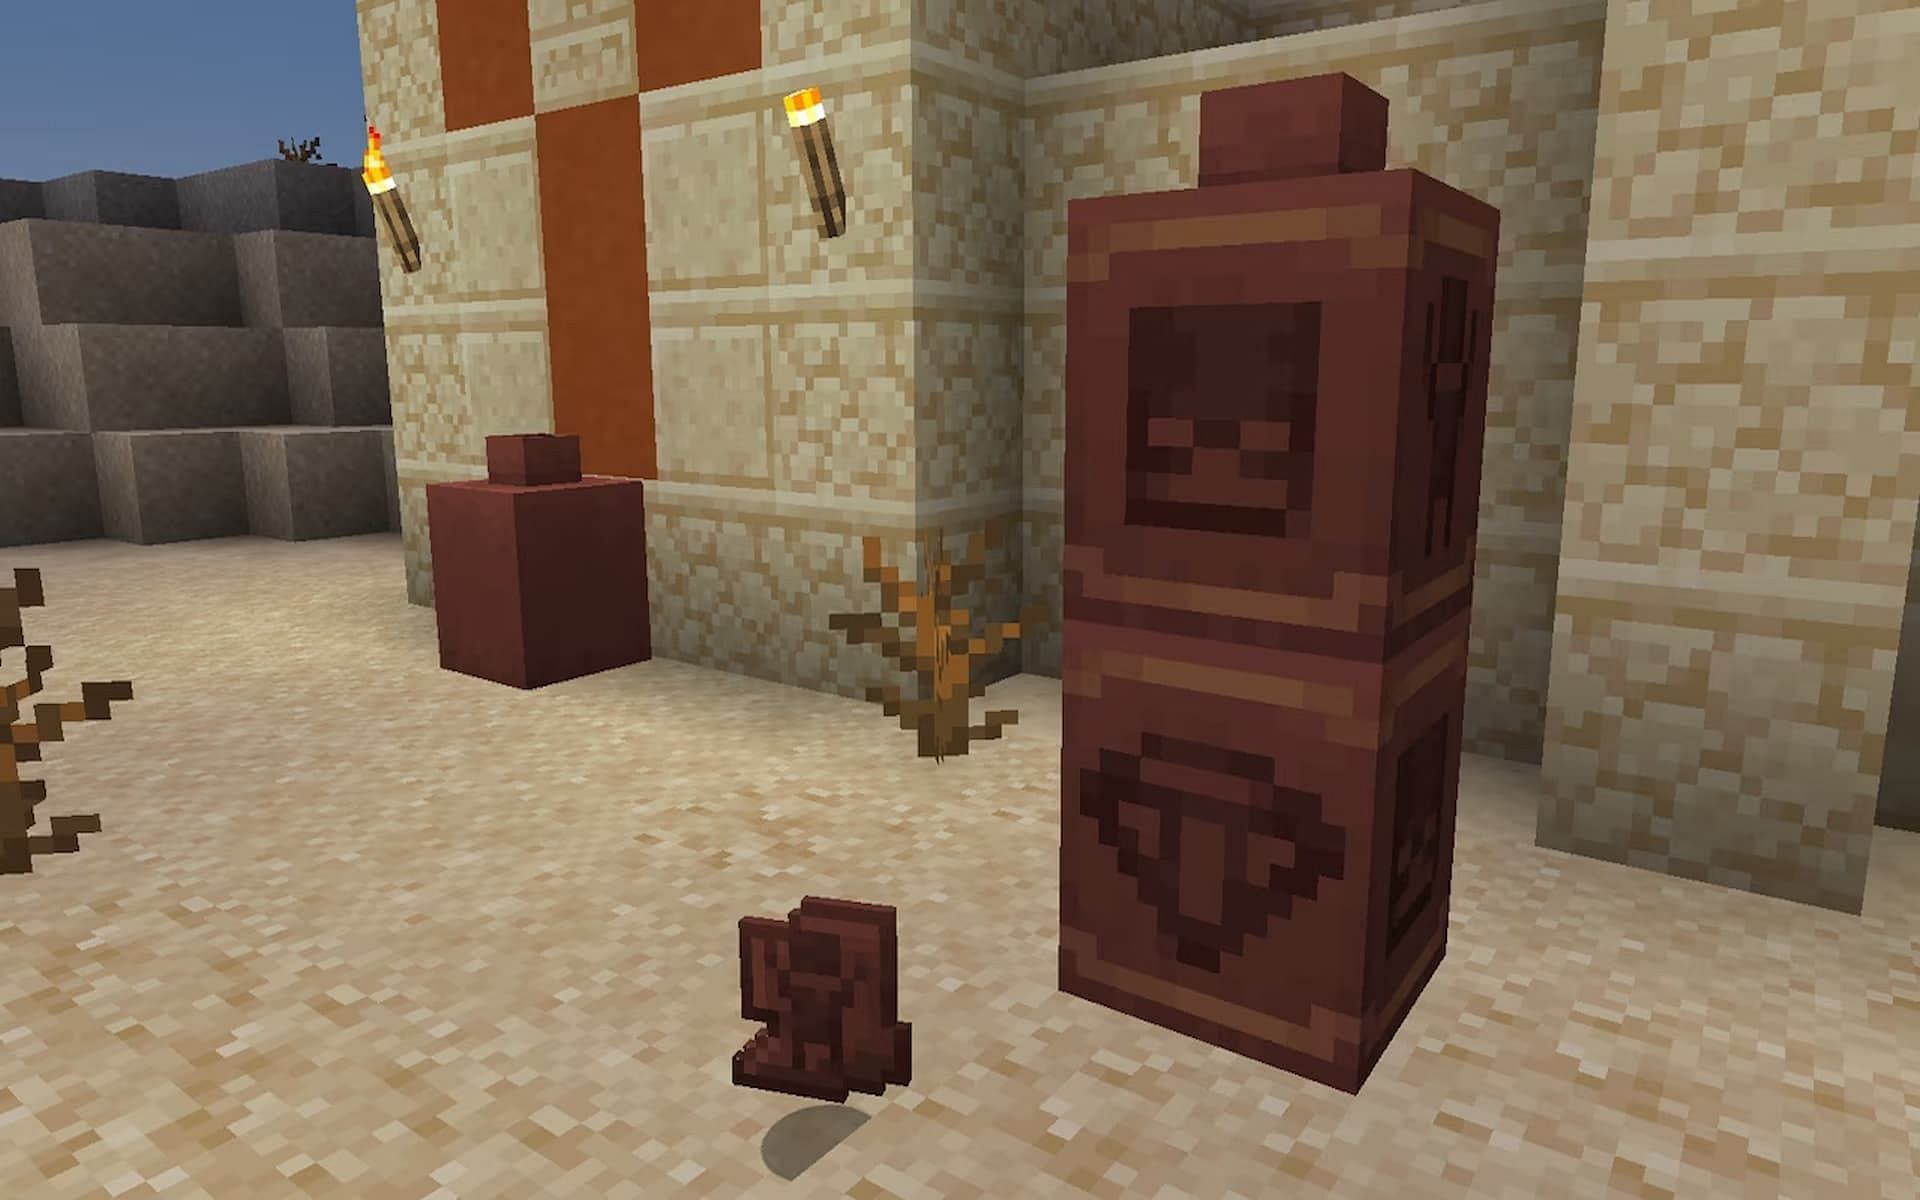 Digging up pottery shards will let players construct the decorated pots (Image via Mojang)